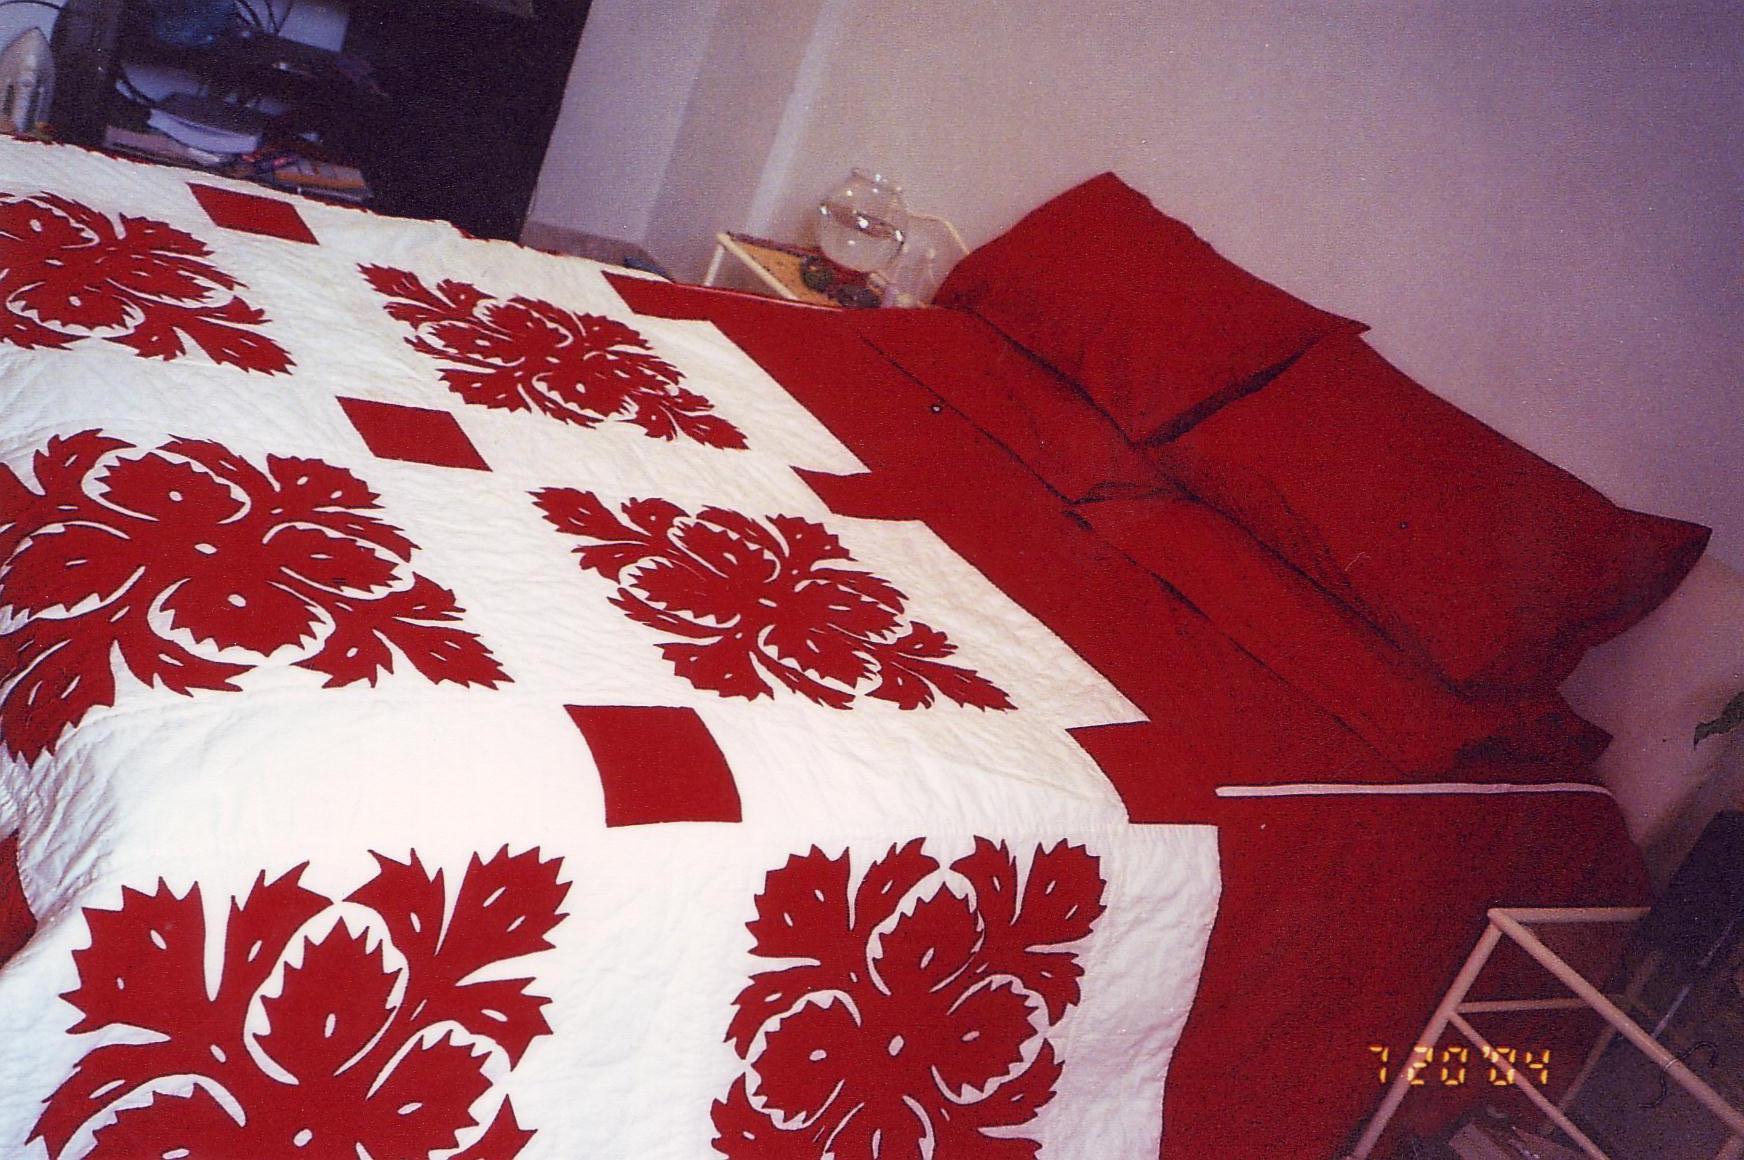 quilted bedding